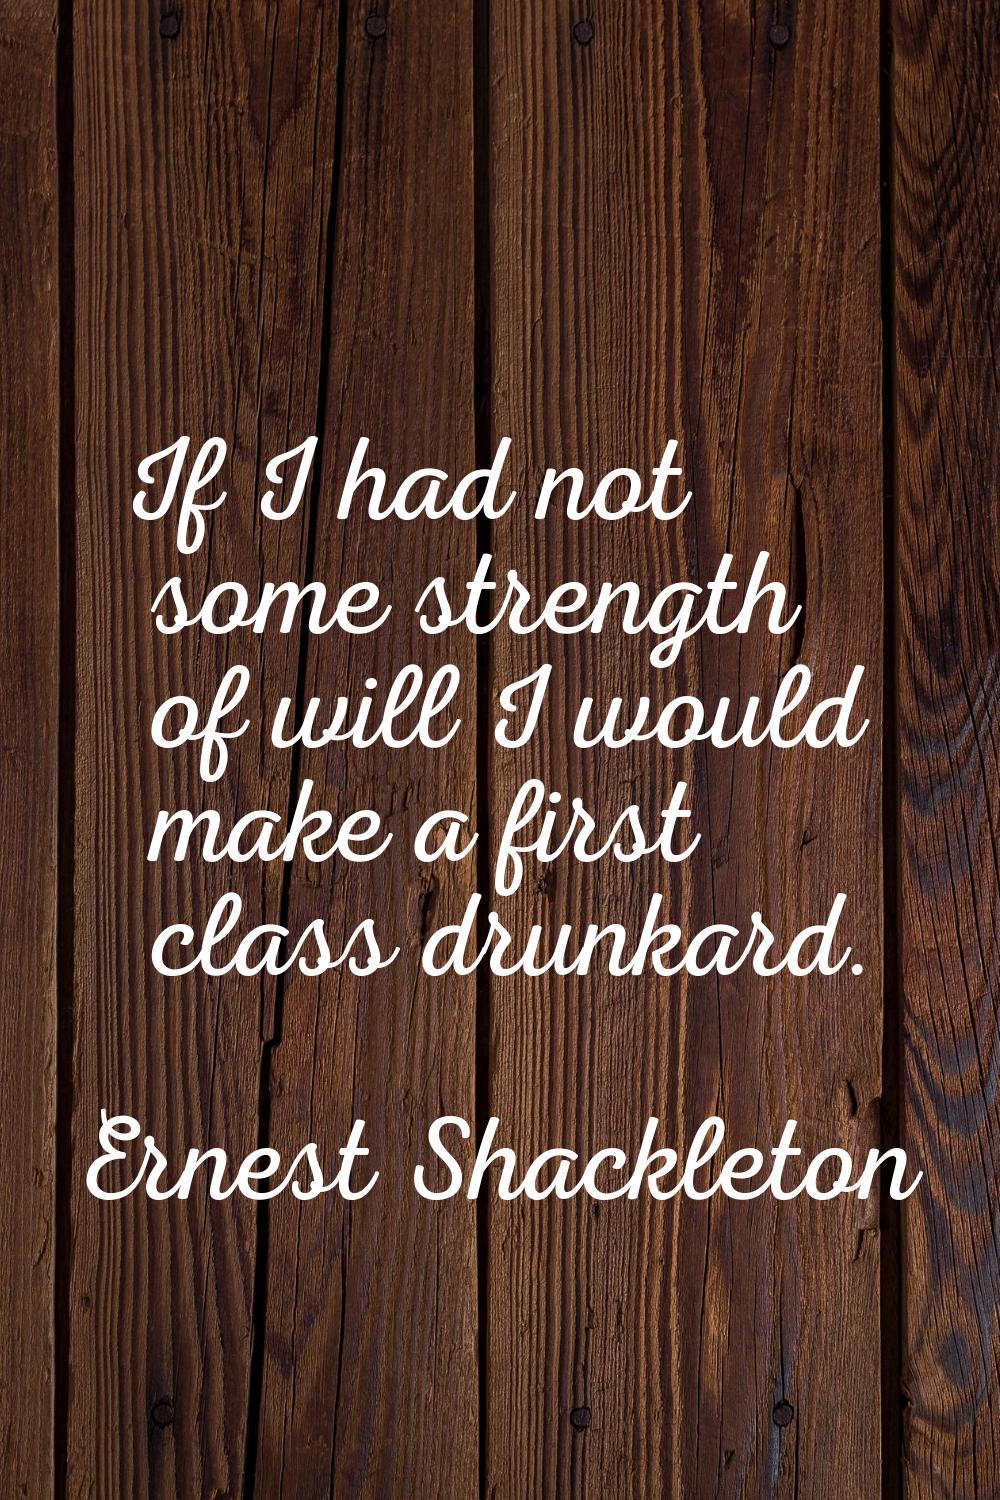 If I had not some strength of will I would make a first class drunkard.